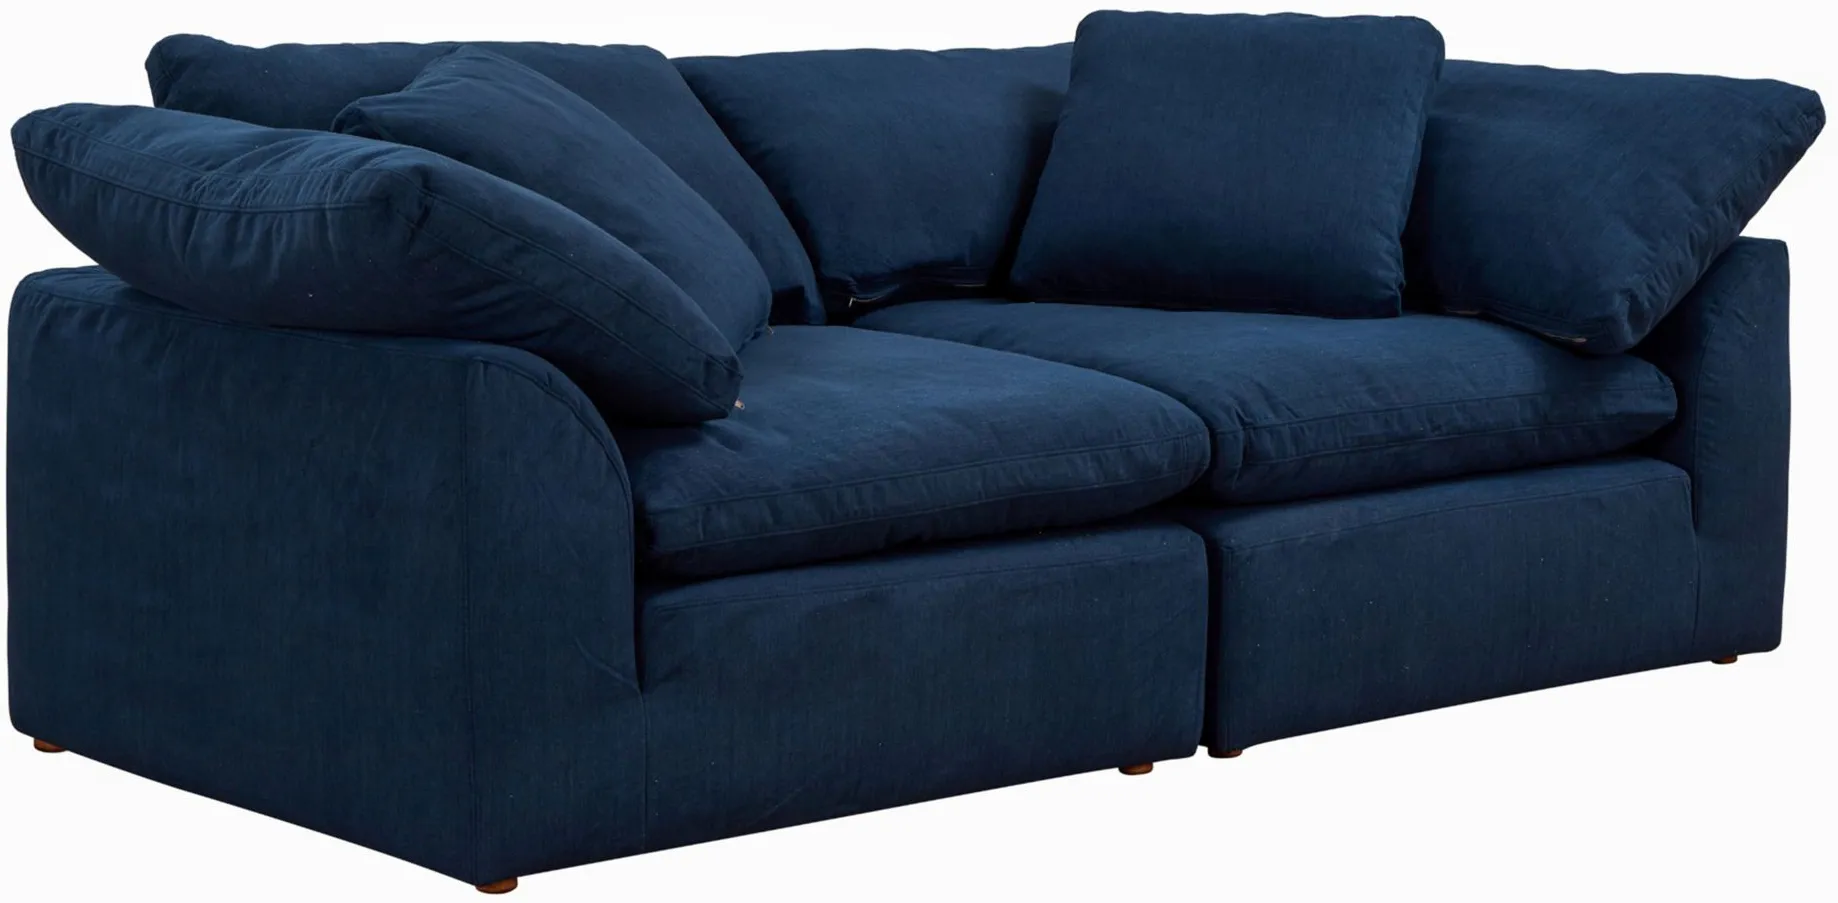 Puff Slipcover 2-pc.Sectional in Navy Blue by Sunset Trading